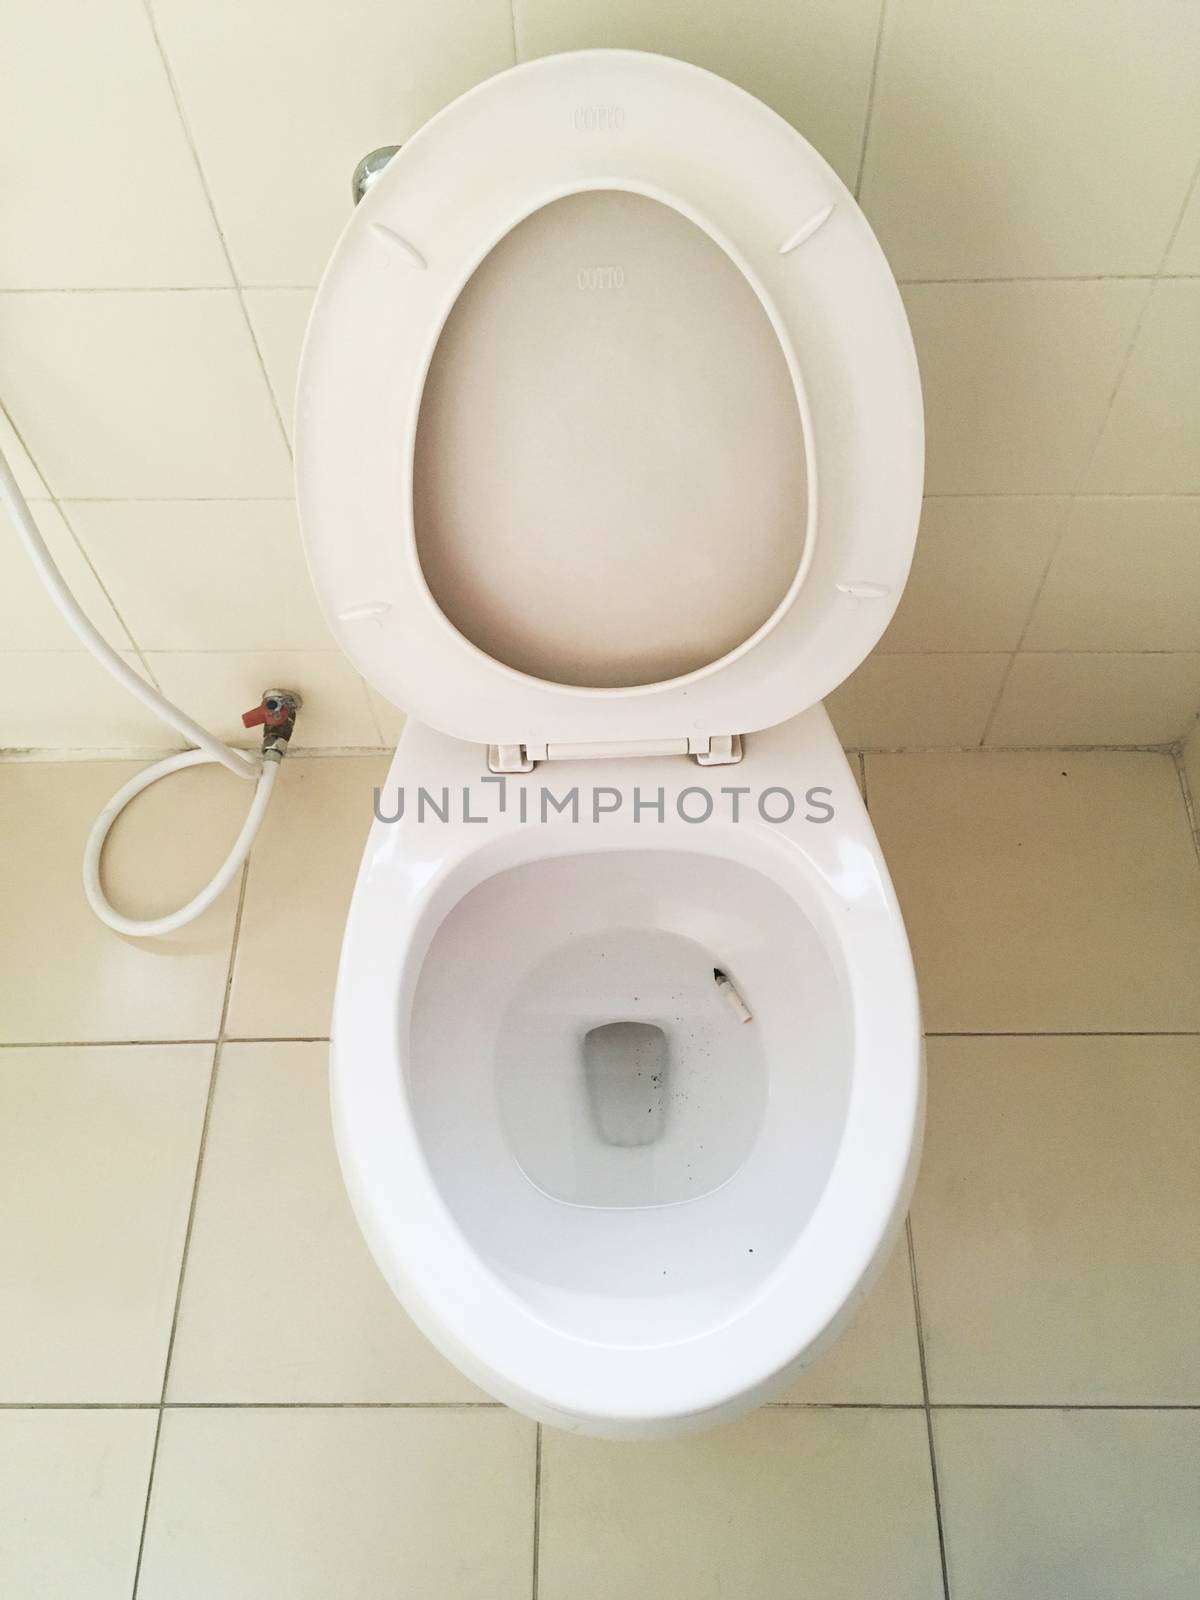 Quit Smoking Cigarettes in the toilet